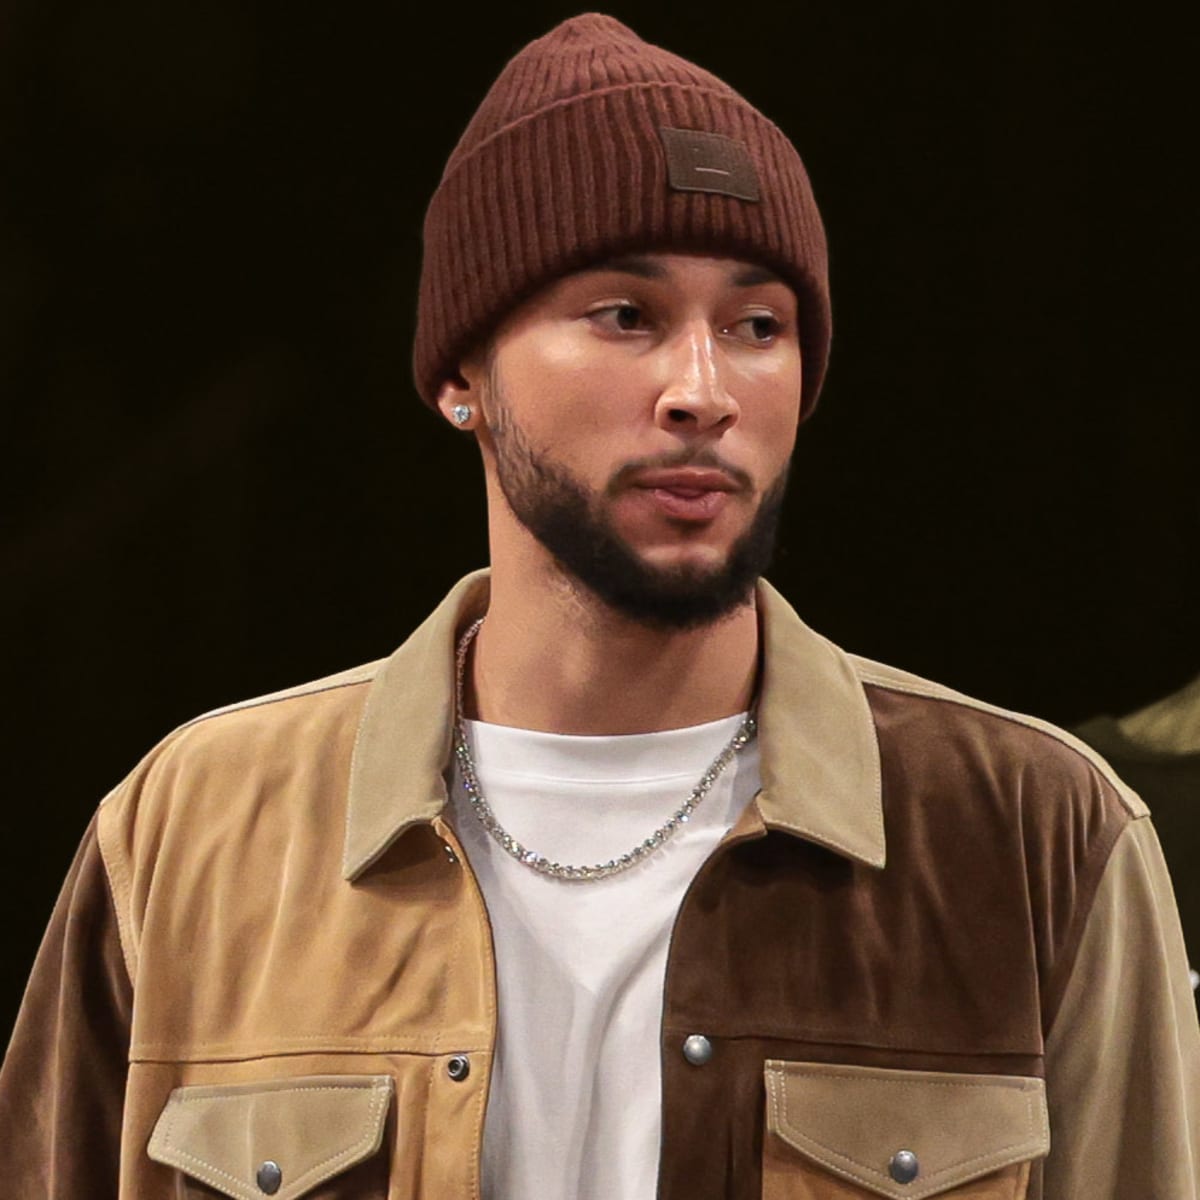 Ben Simmons Cropped Sweater. By Artistshot